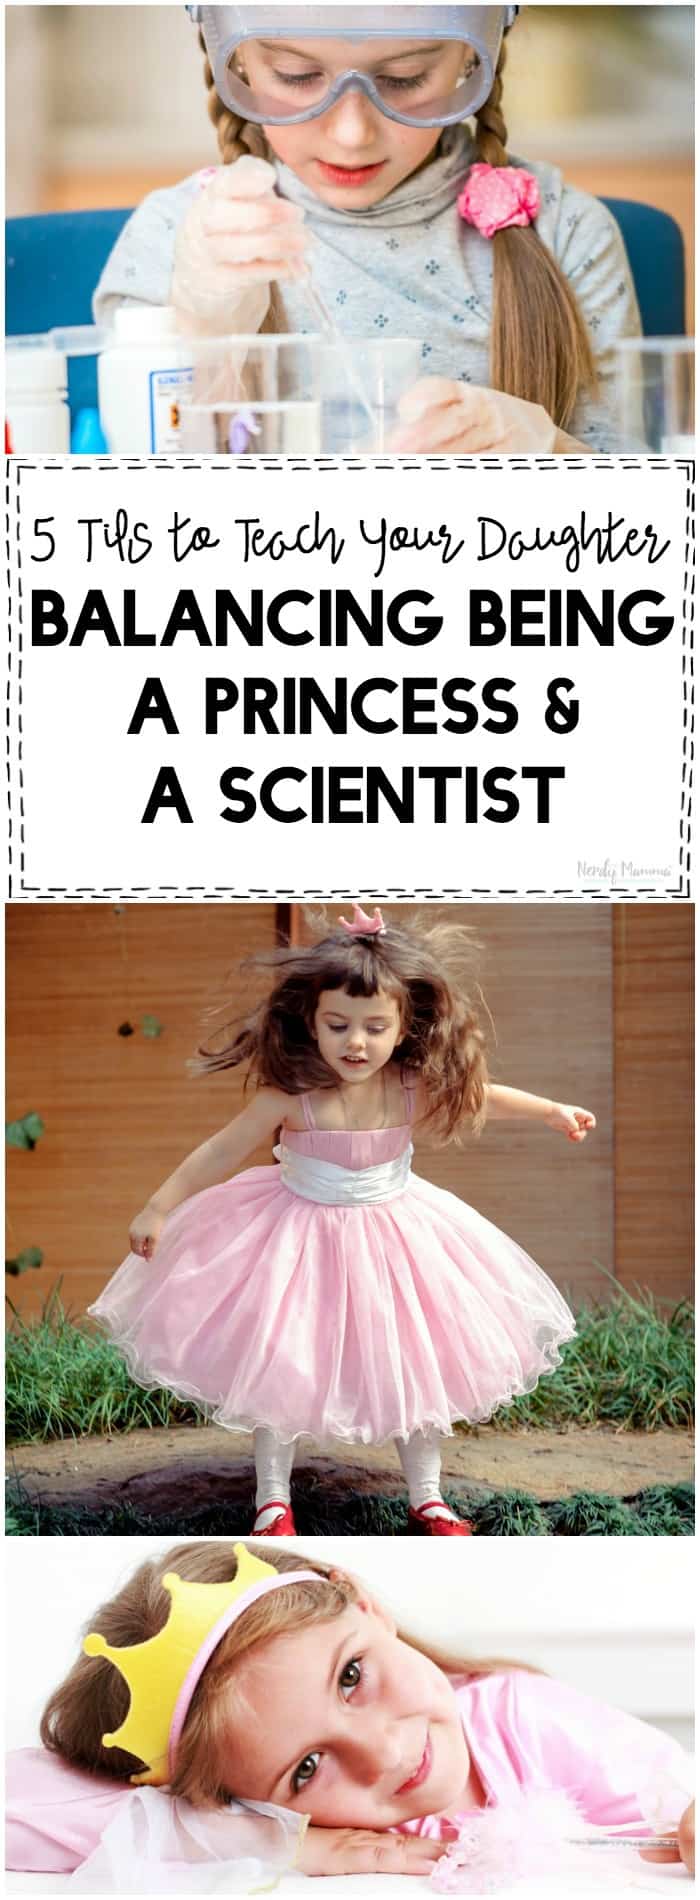 My girls can TOTALLY be badass scientists AND princesses, and so can yours!!